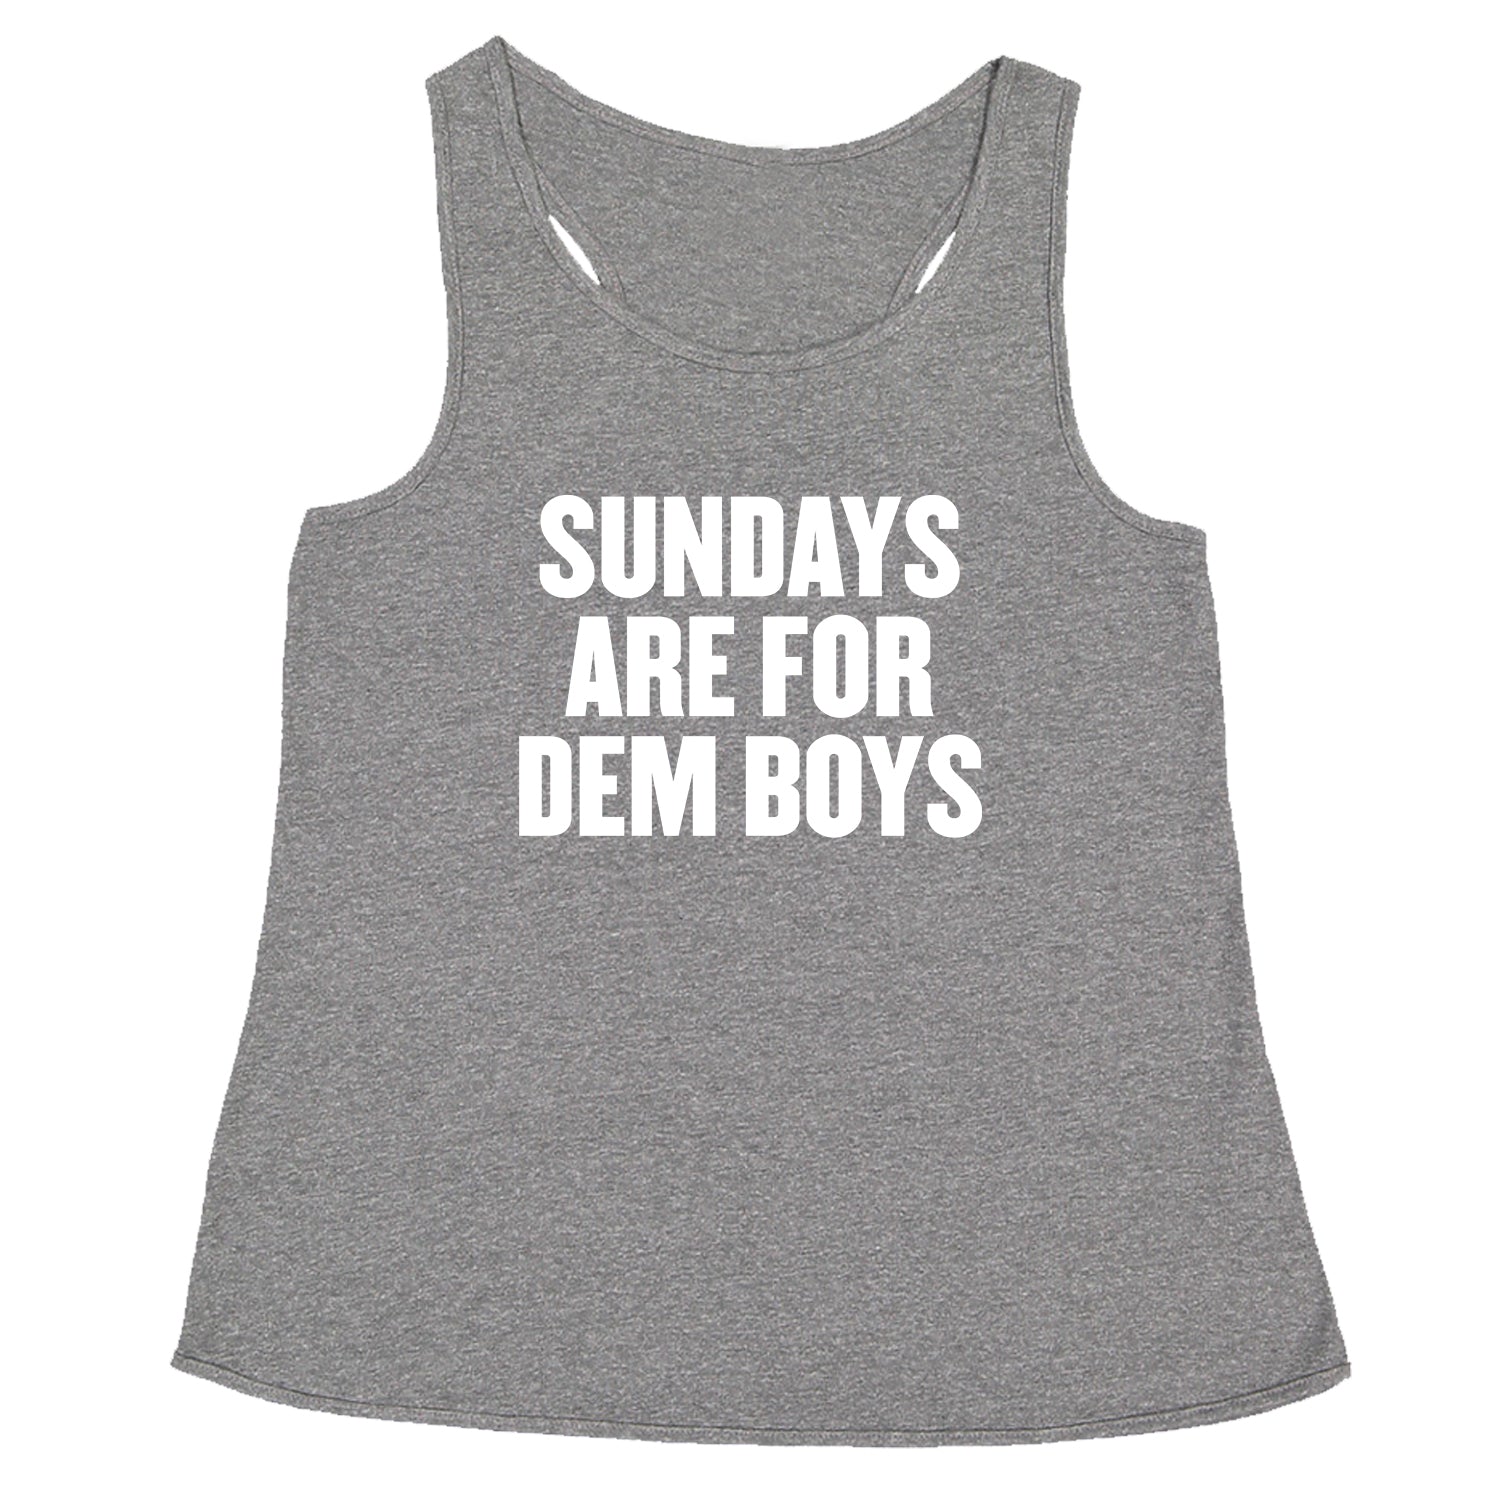 Sundays Are For Dem Boys Racerback Tank Top for Women dallas, fan, jersey, team, texas by Expression Tees